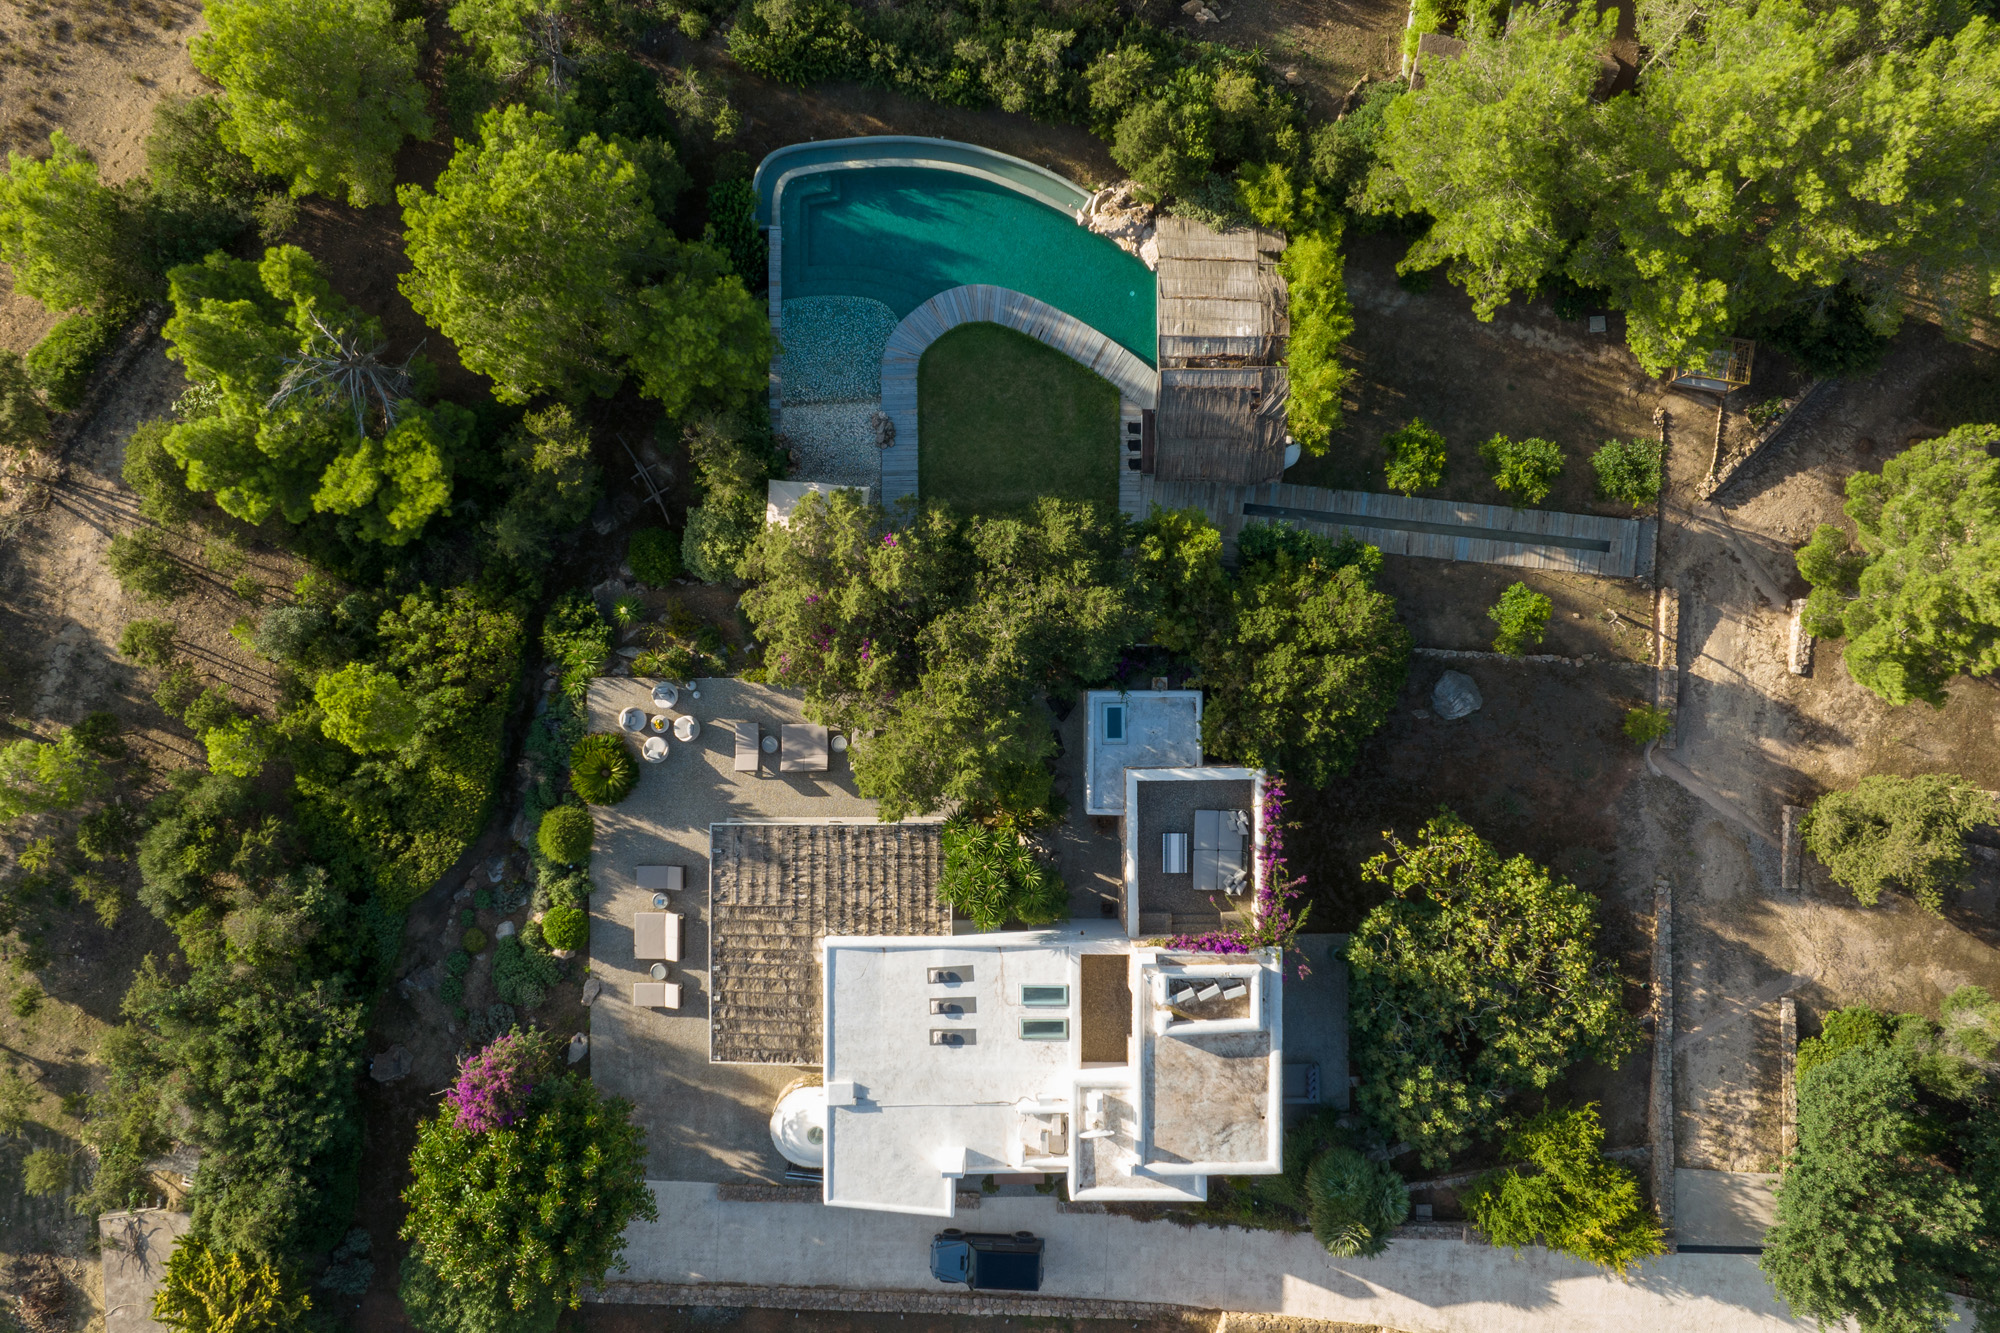 Can Bikini Ibiza Villa ariel shot with curved pool and pine forest